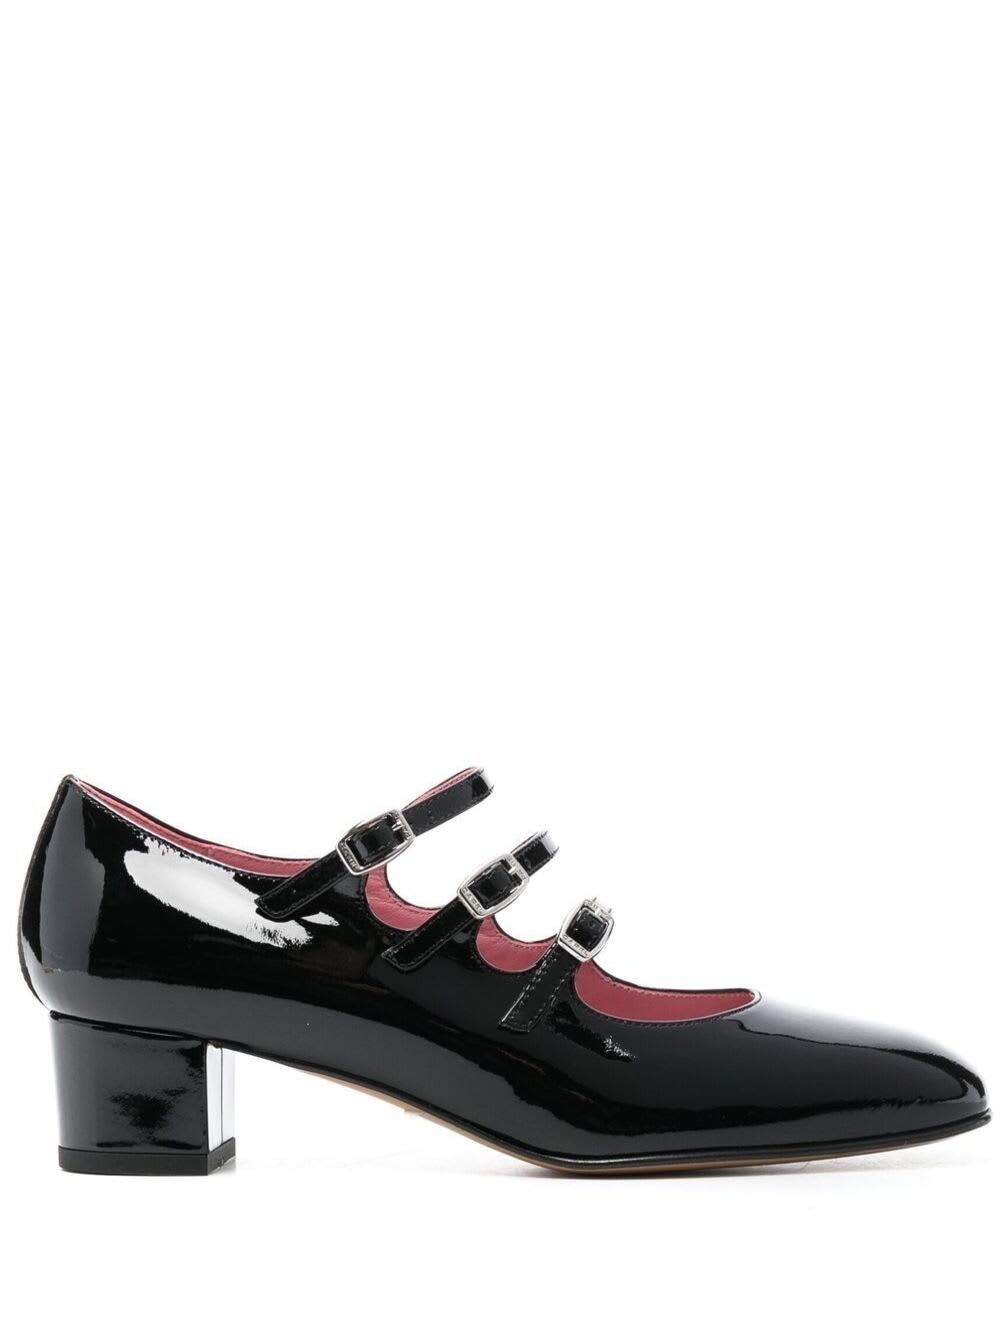 kina Black Mary Janes With Straps And Block Heel In Patent Leather Woman